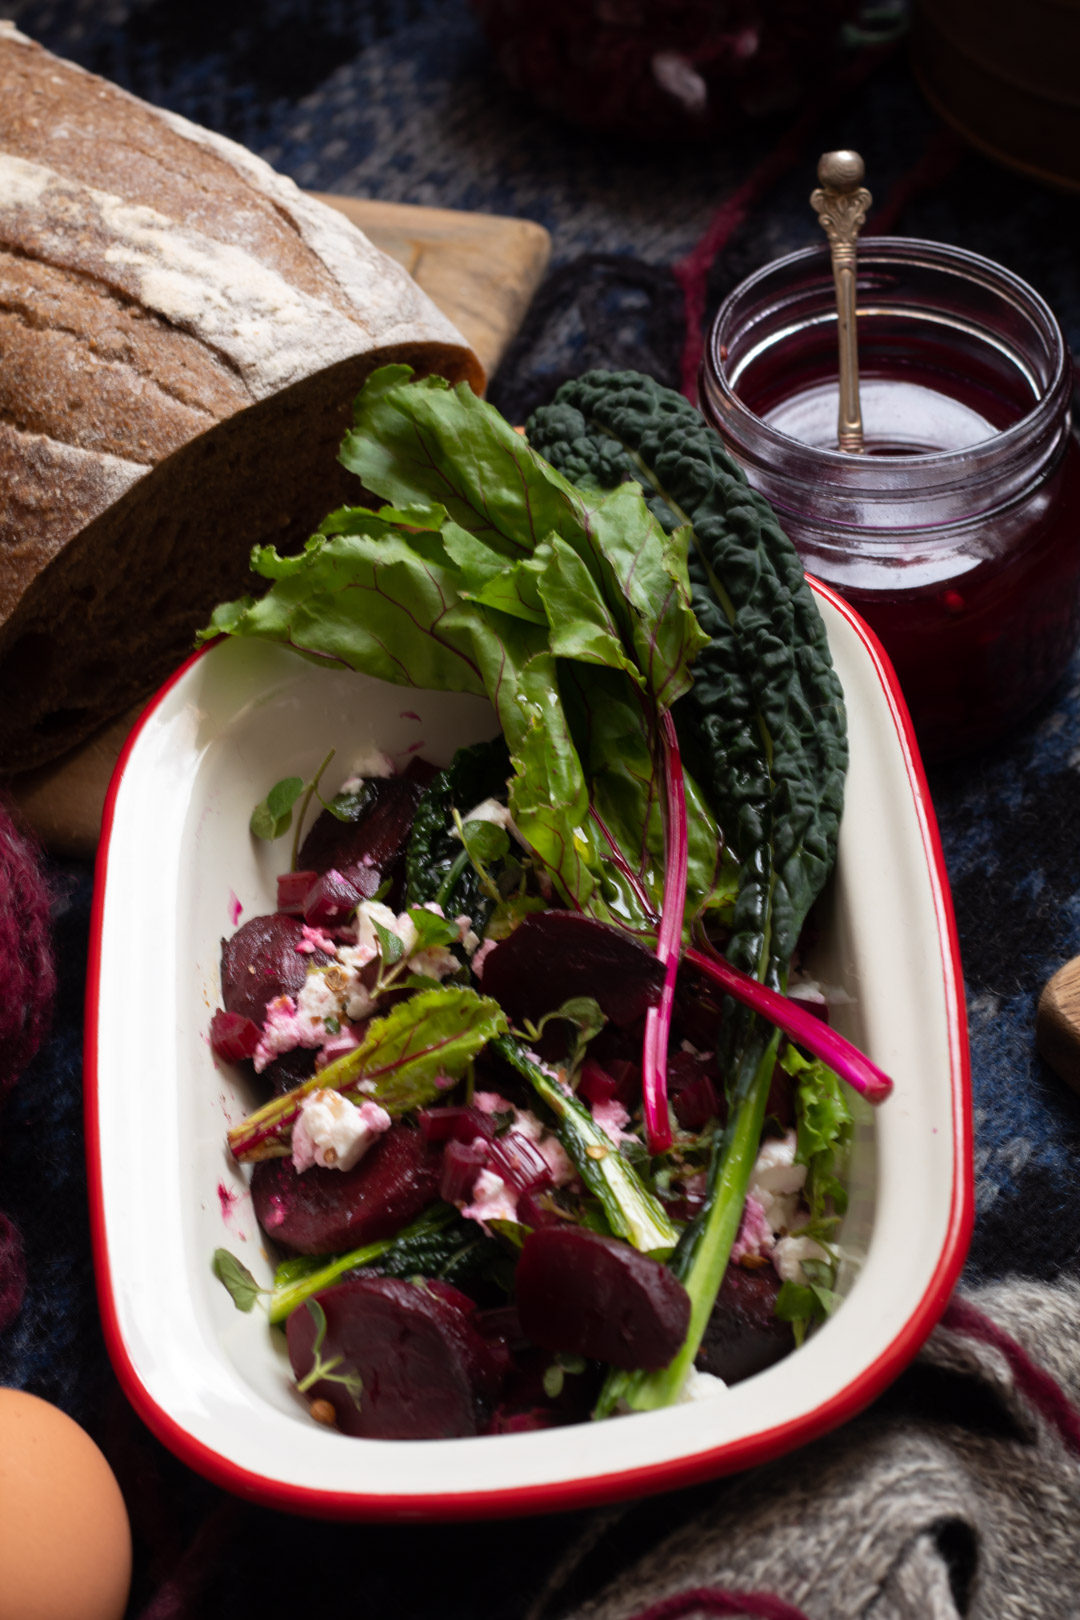 beetroot salad picnic: roasted beetroot, beetroot stem quick pickle, beetroot leaves - use up all of your beetroot